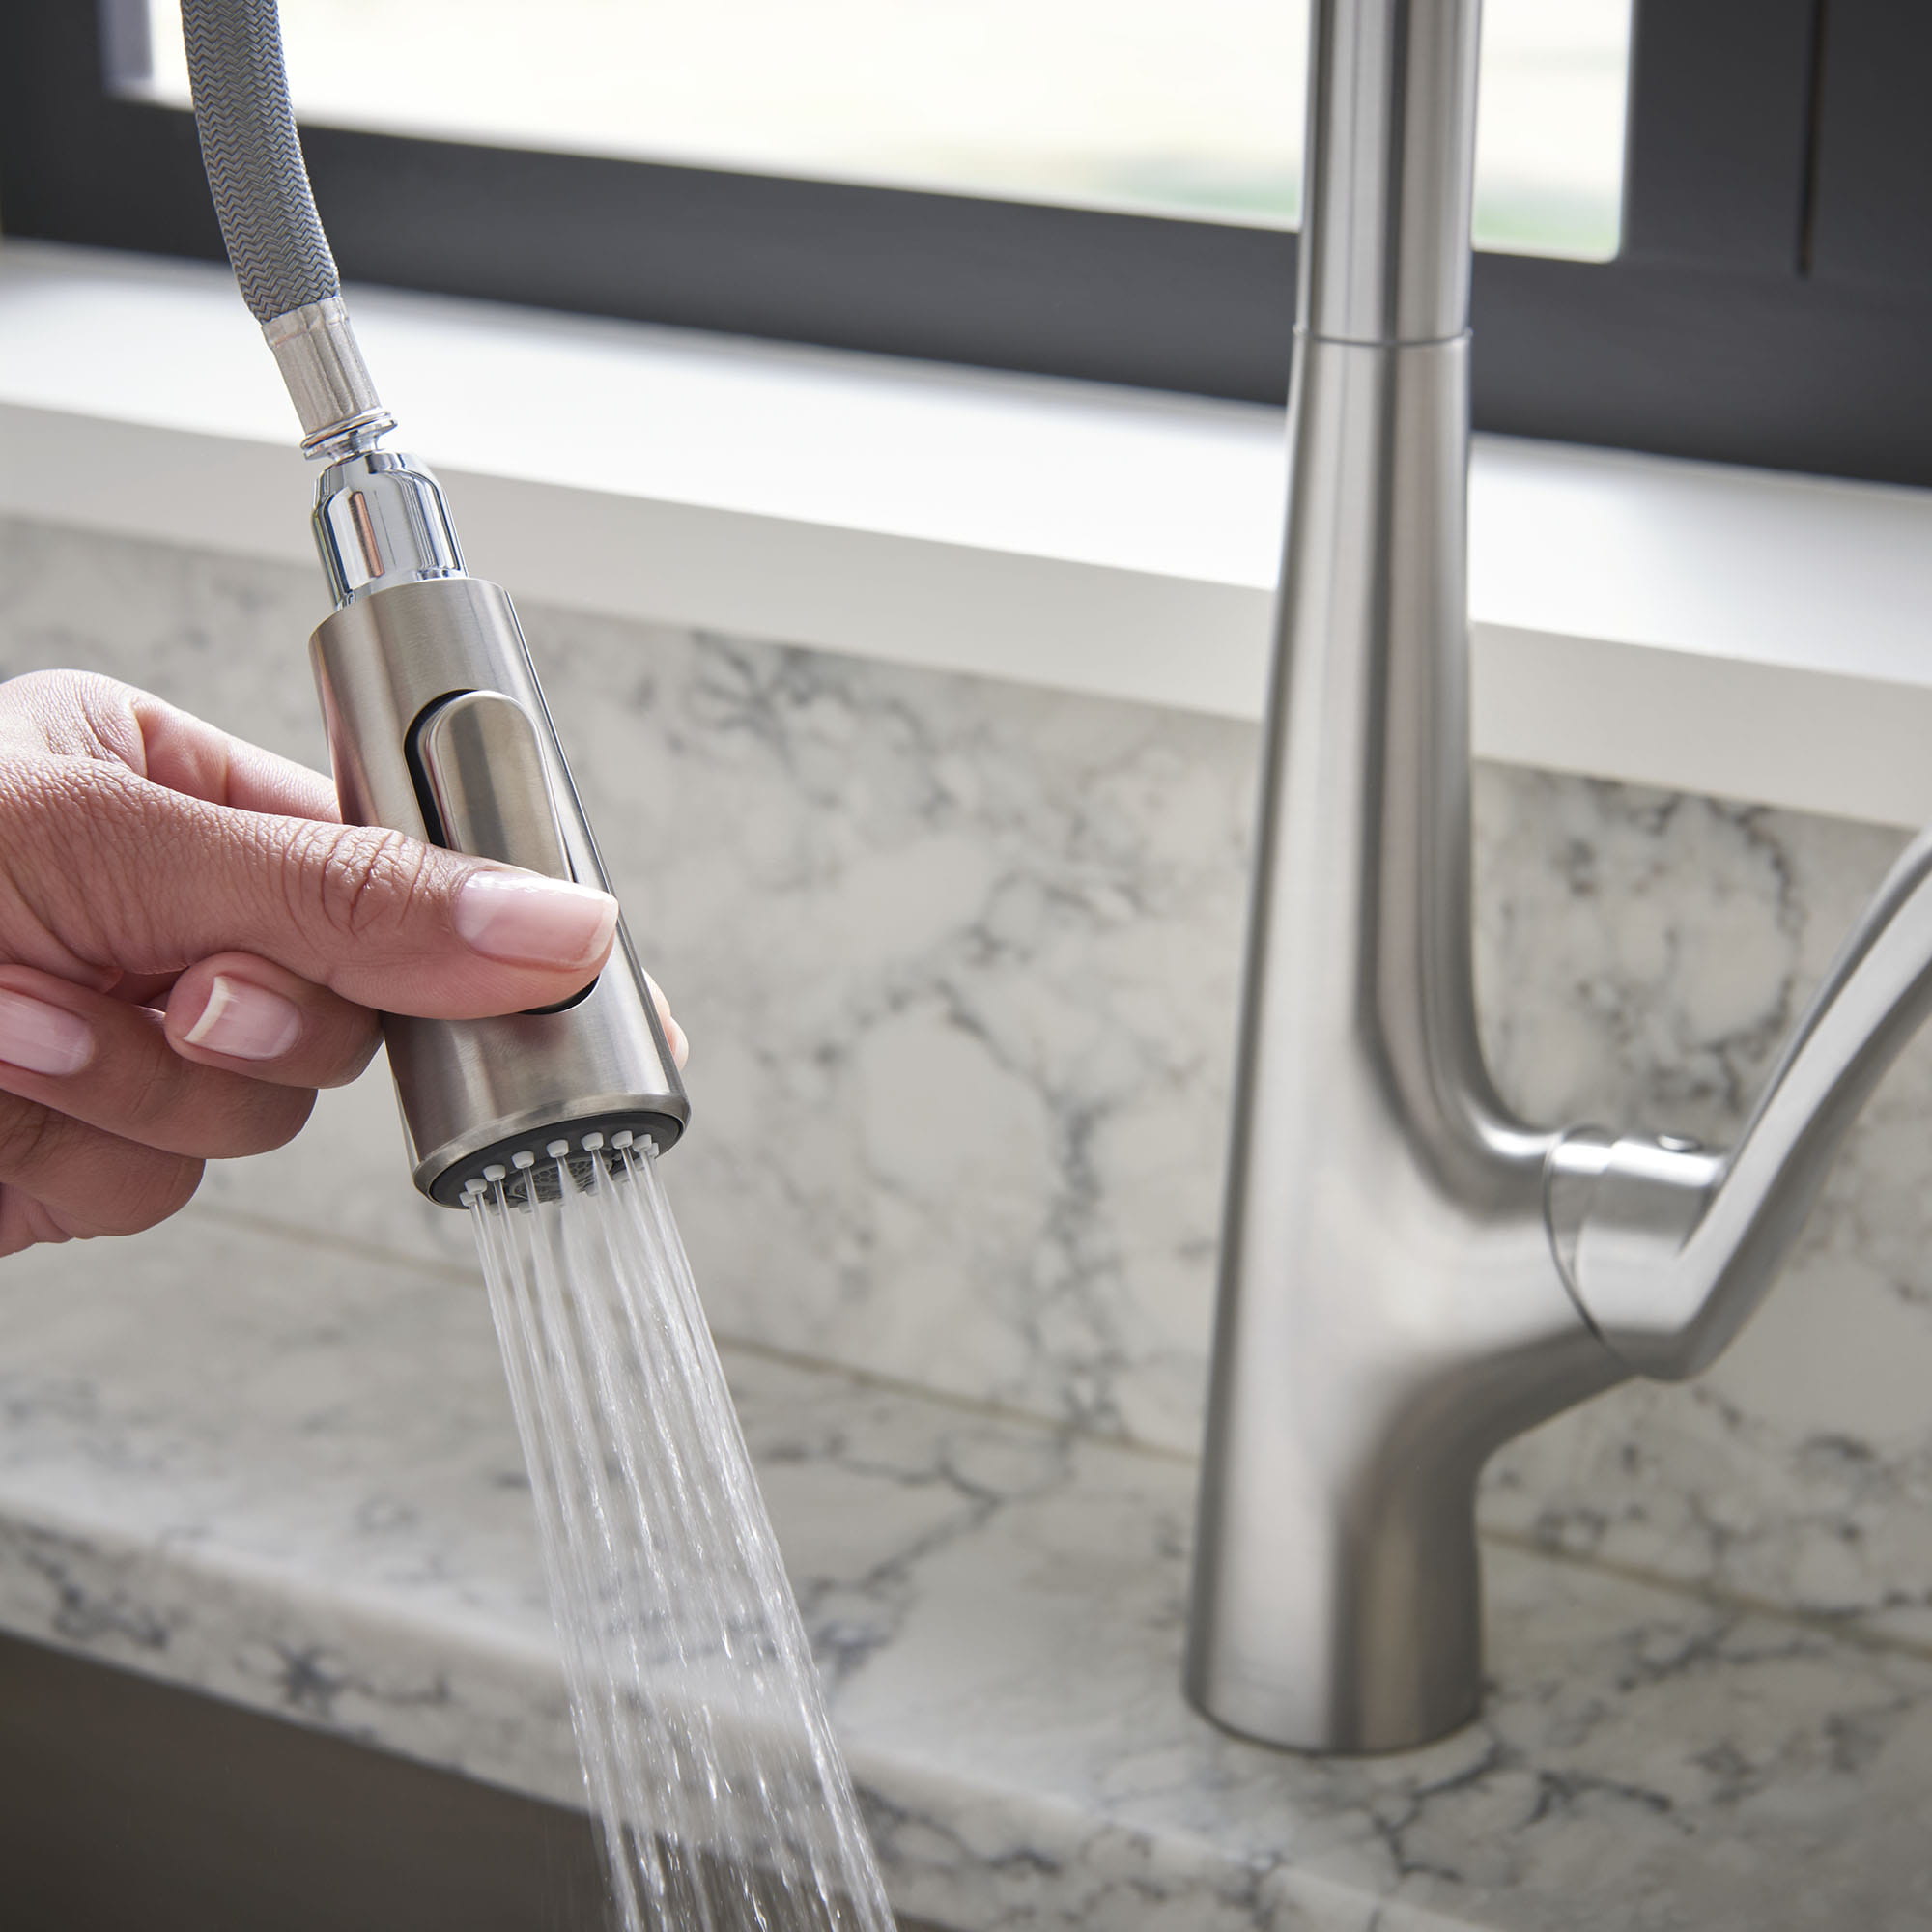 Copley Pull-Down Kitchen Faucet with Soap Dispenser